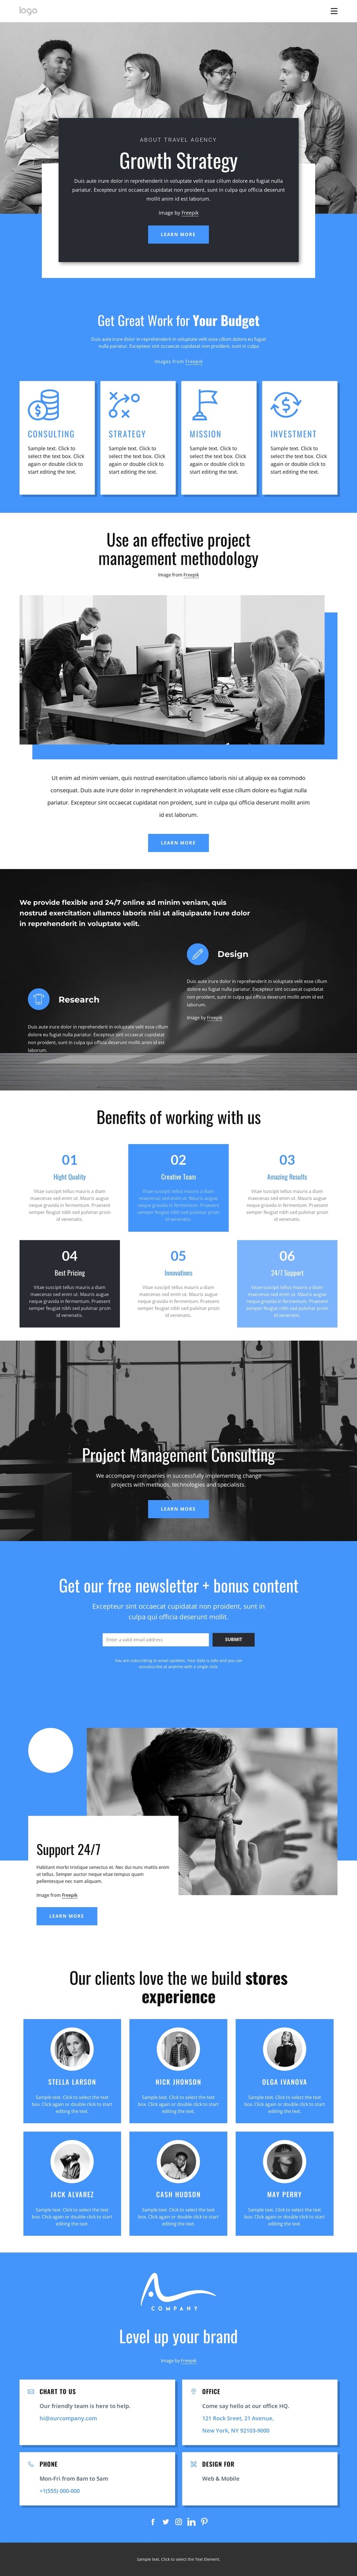 Growth strategy consulting company Template